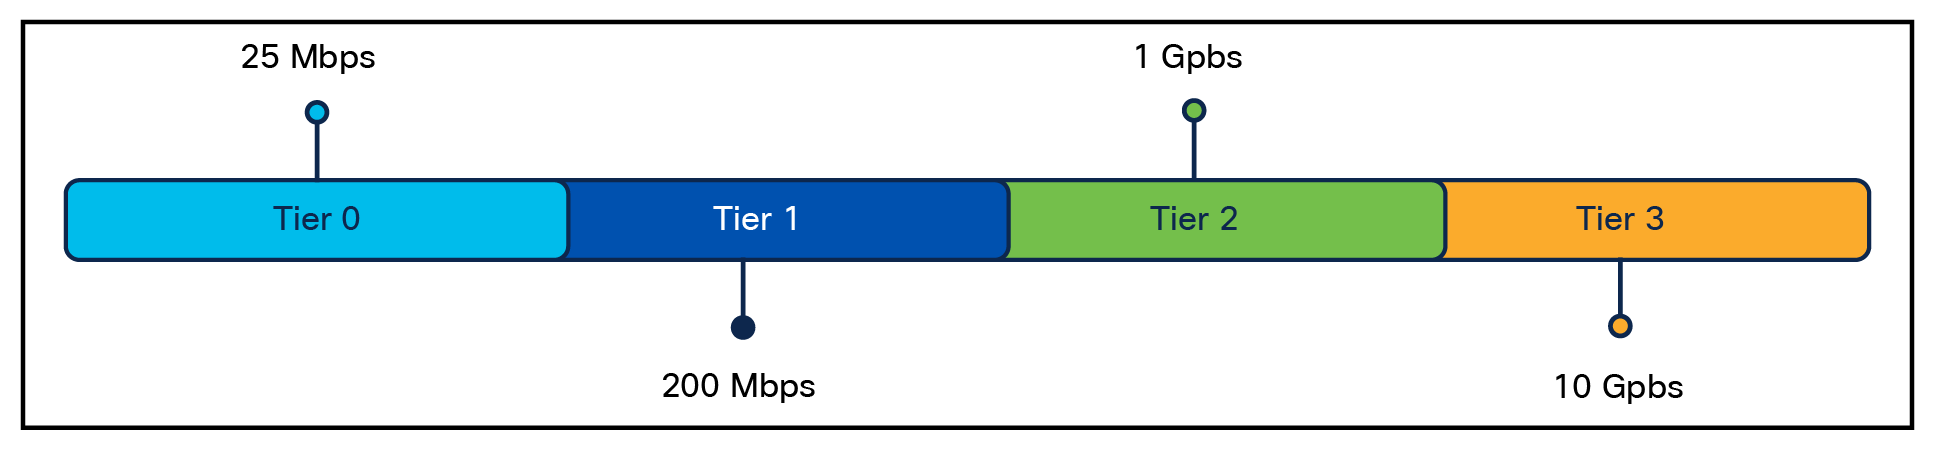 Four bandwidth tiers in Cisco DNA Software for SD-WAN and Routing